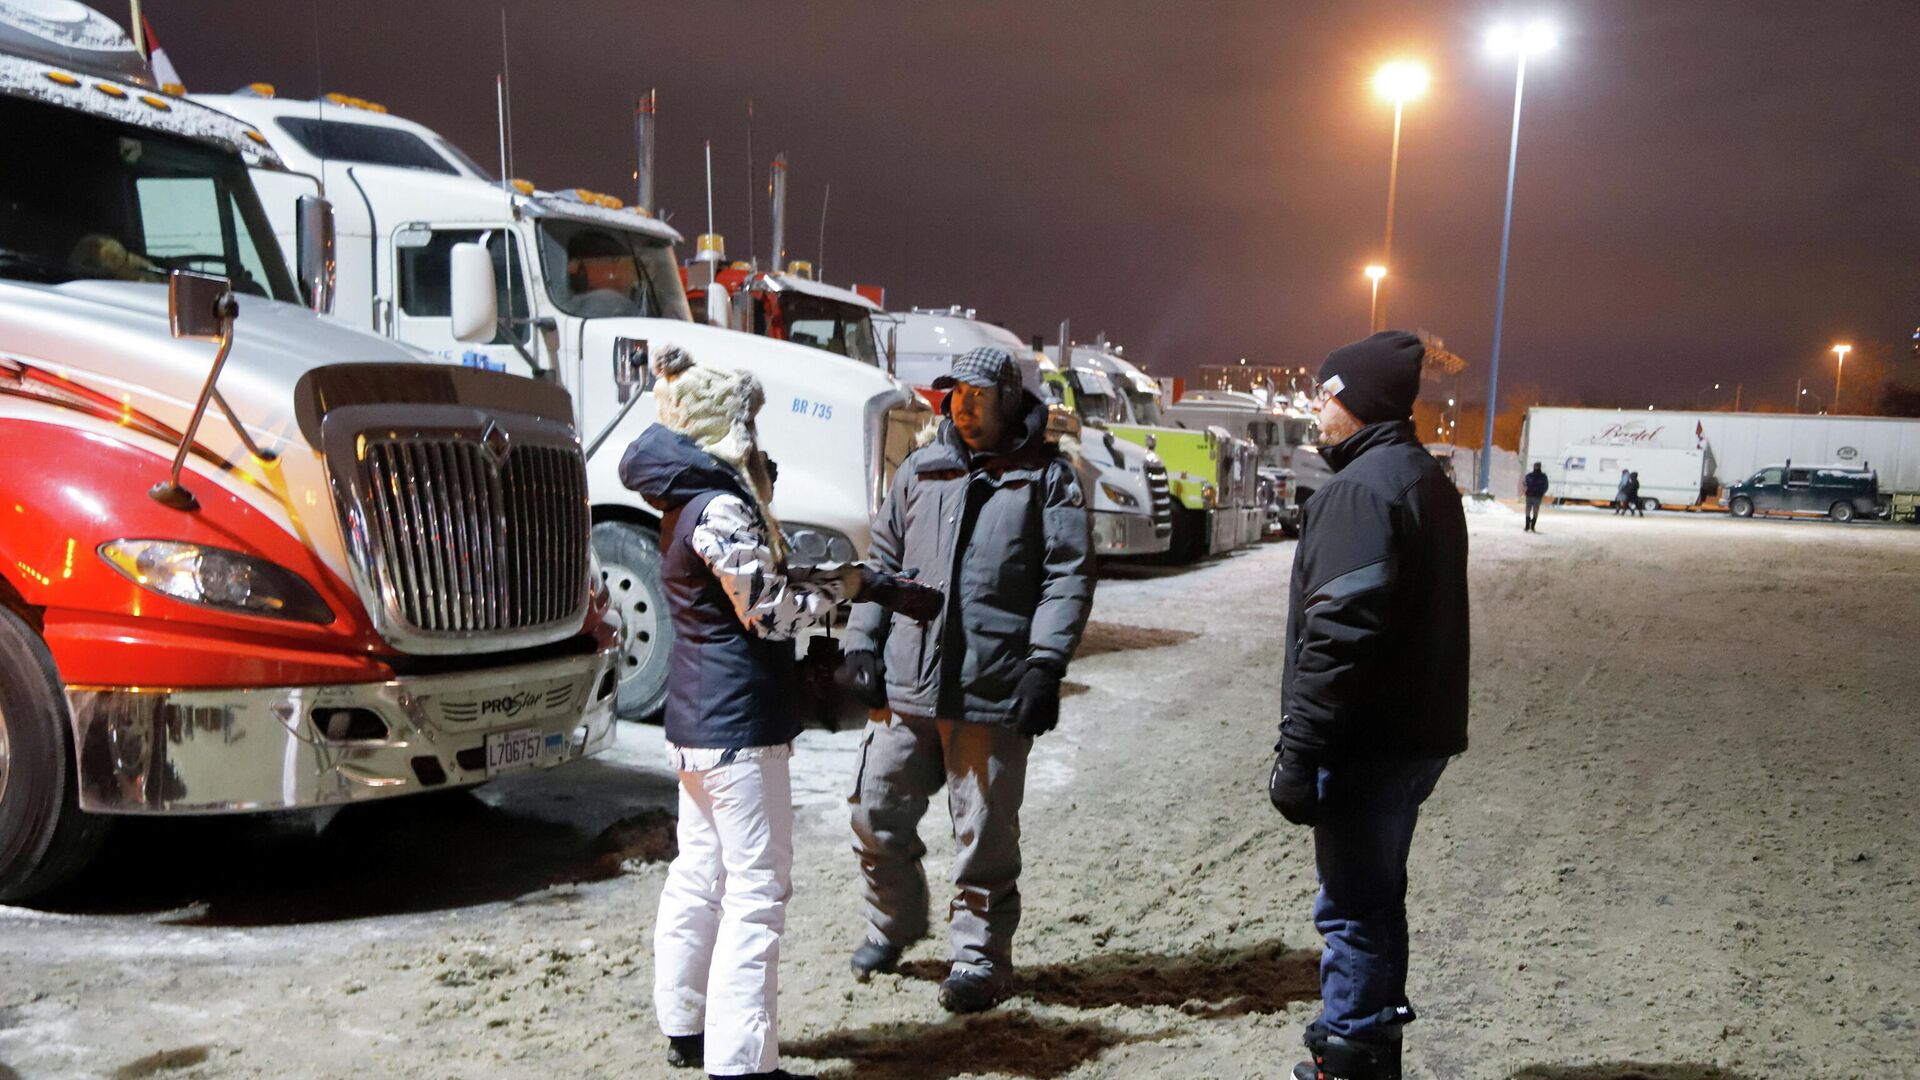 Truckers and supporters continue to protest against COVID-19 vaccine mandates in Ottawa - Sputnik International, 1920, 07.02.2022